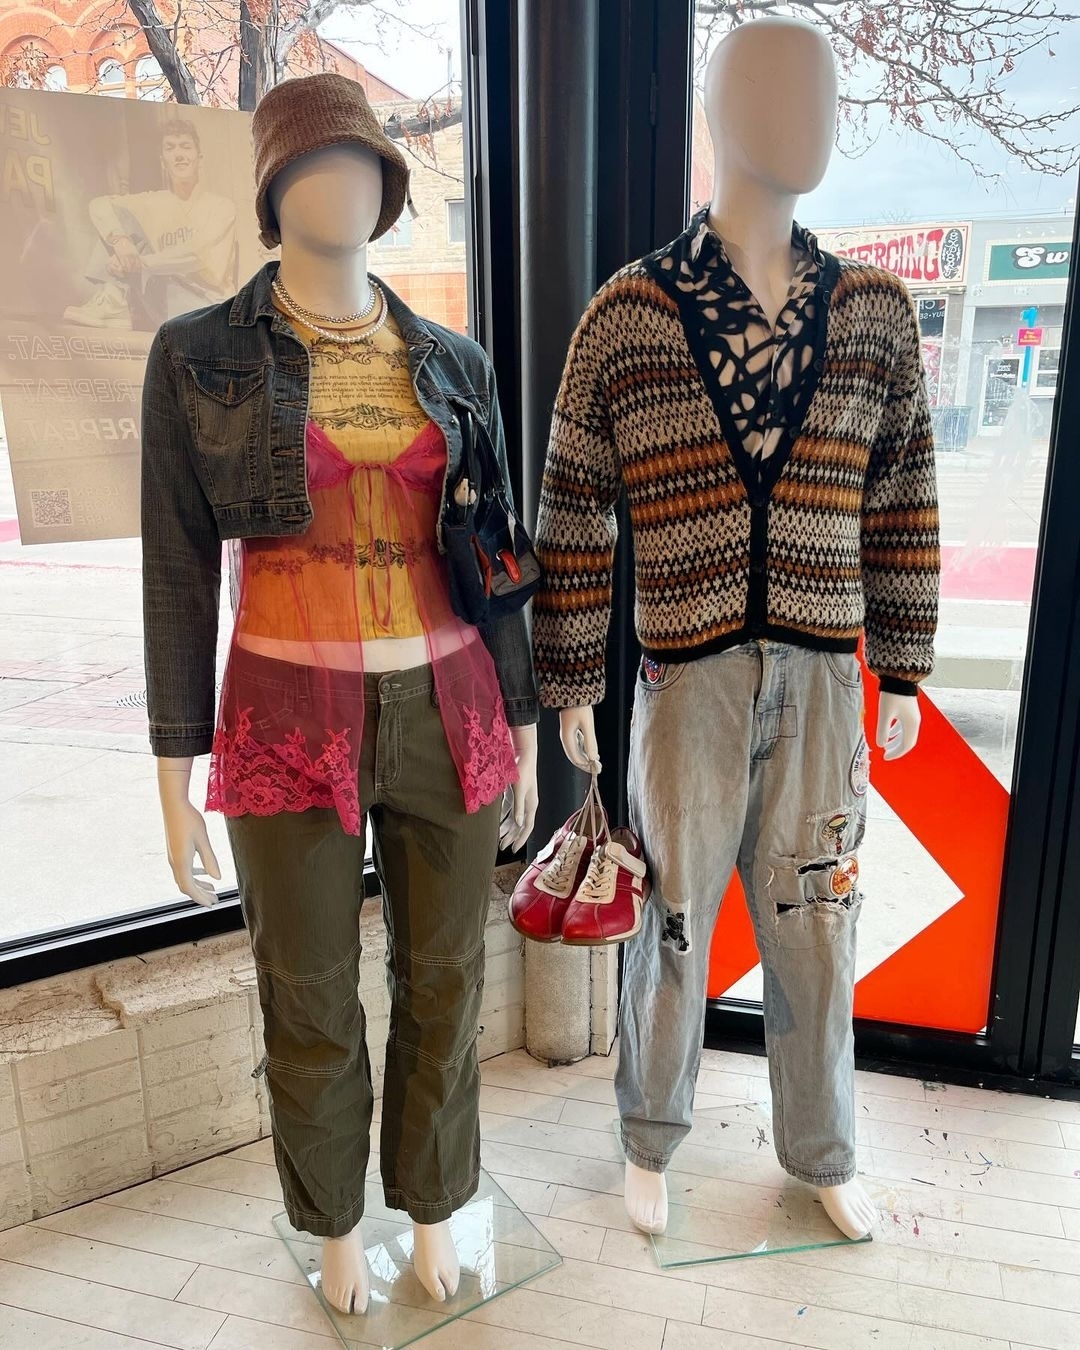 Our mannequins are ready for spring, are you? 🙊🌷

In need of a spring refresh? Visit your local Crossroads to shop spring styles, sustainably! Click the link in our bio to find a store near you.

📸: Crossroads Denver @crossroads_colorado 

#crossroadstrading #crossroadsfinds #crossroadsstore #fashionfinds #buyselltrade #style #thriftfinds #consignment #shopping #womensfashion #mensfashion #fashionblogger #ootd #fashion #thrift #sustainablefashion #secondhandfirst #shopthrift #consignment #thrifted